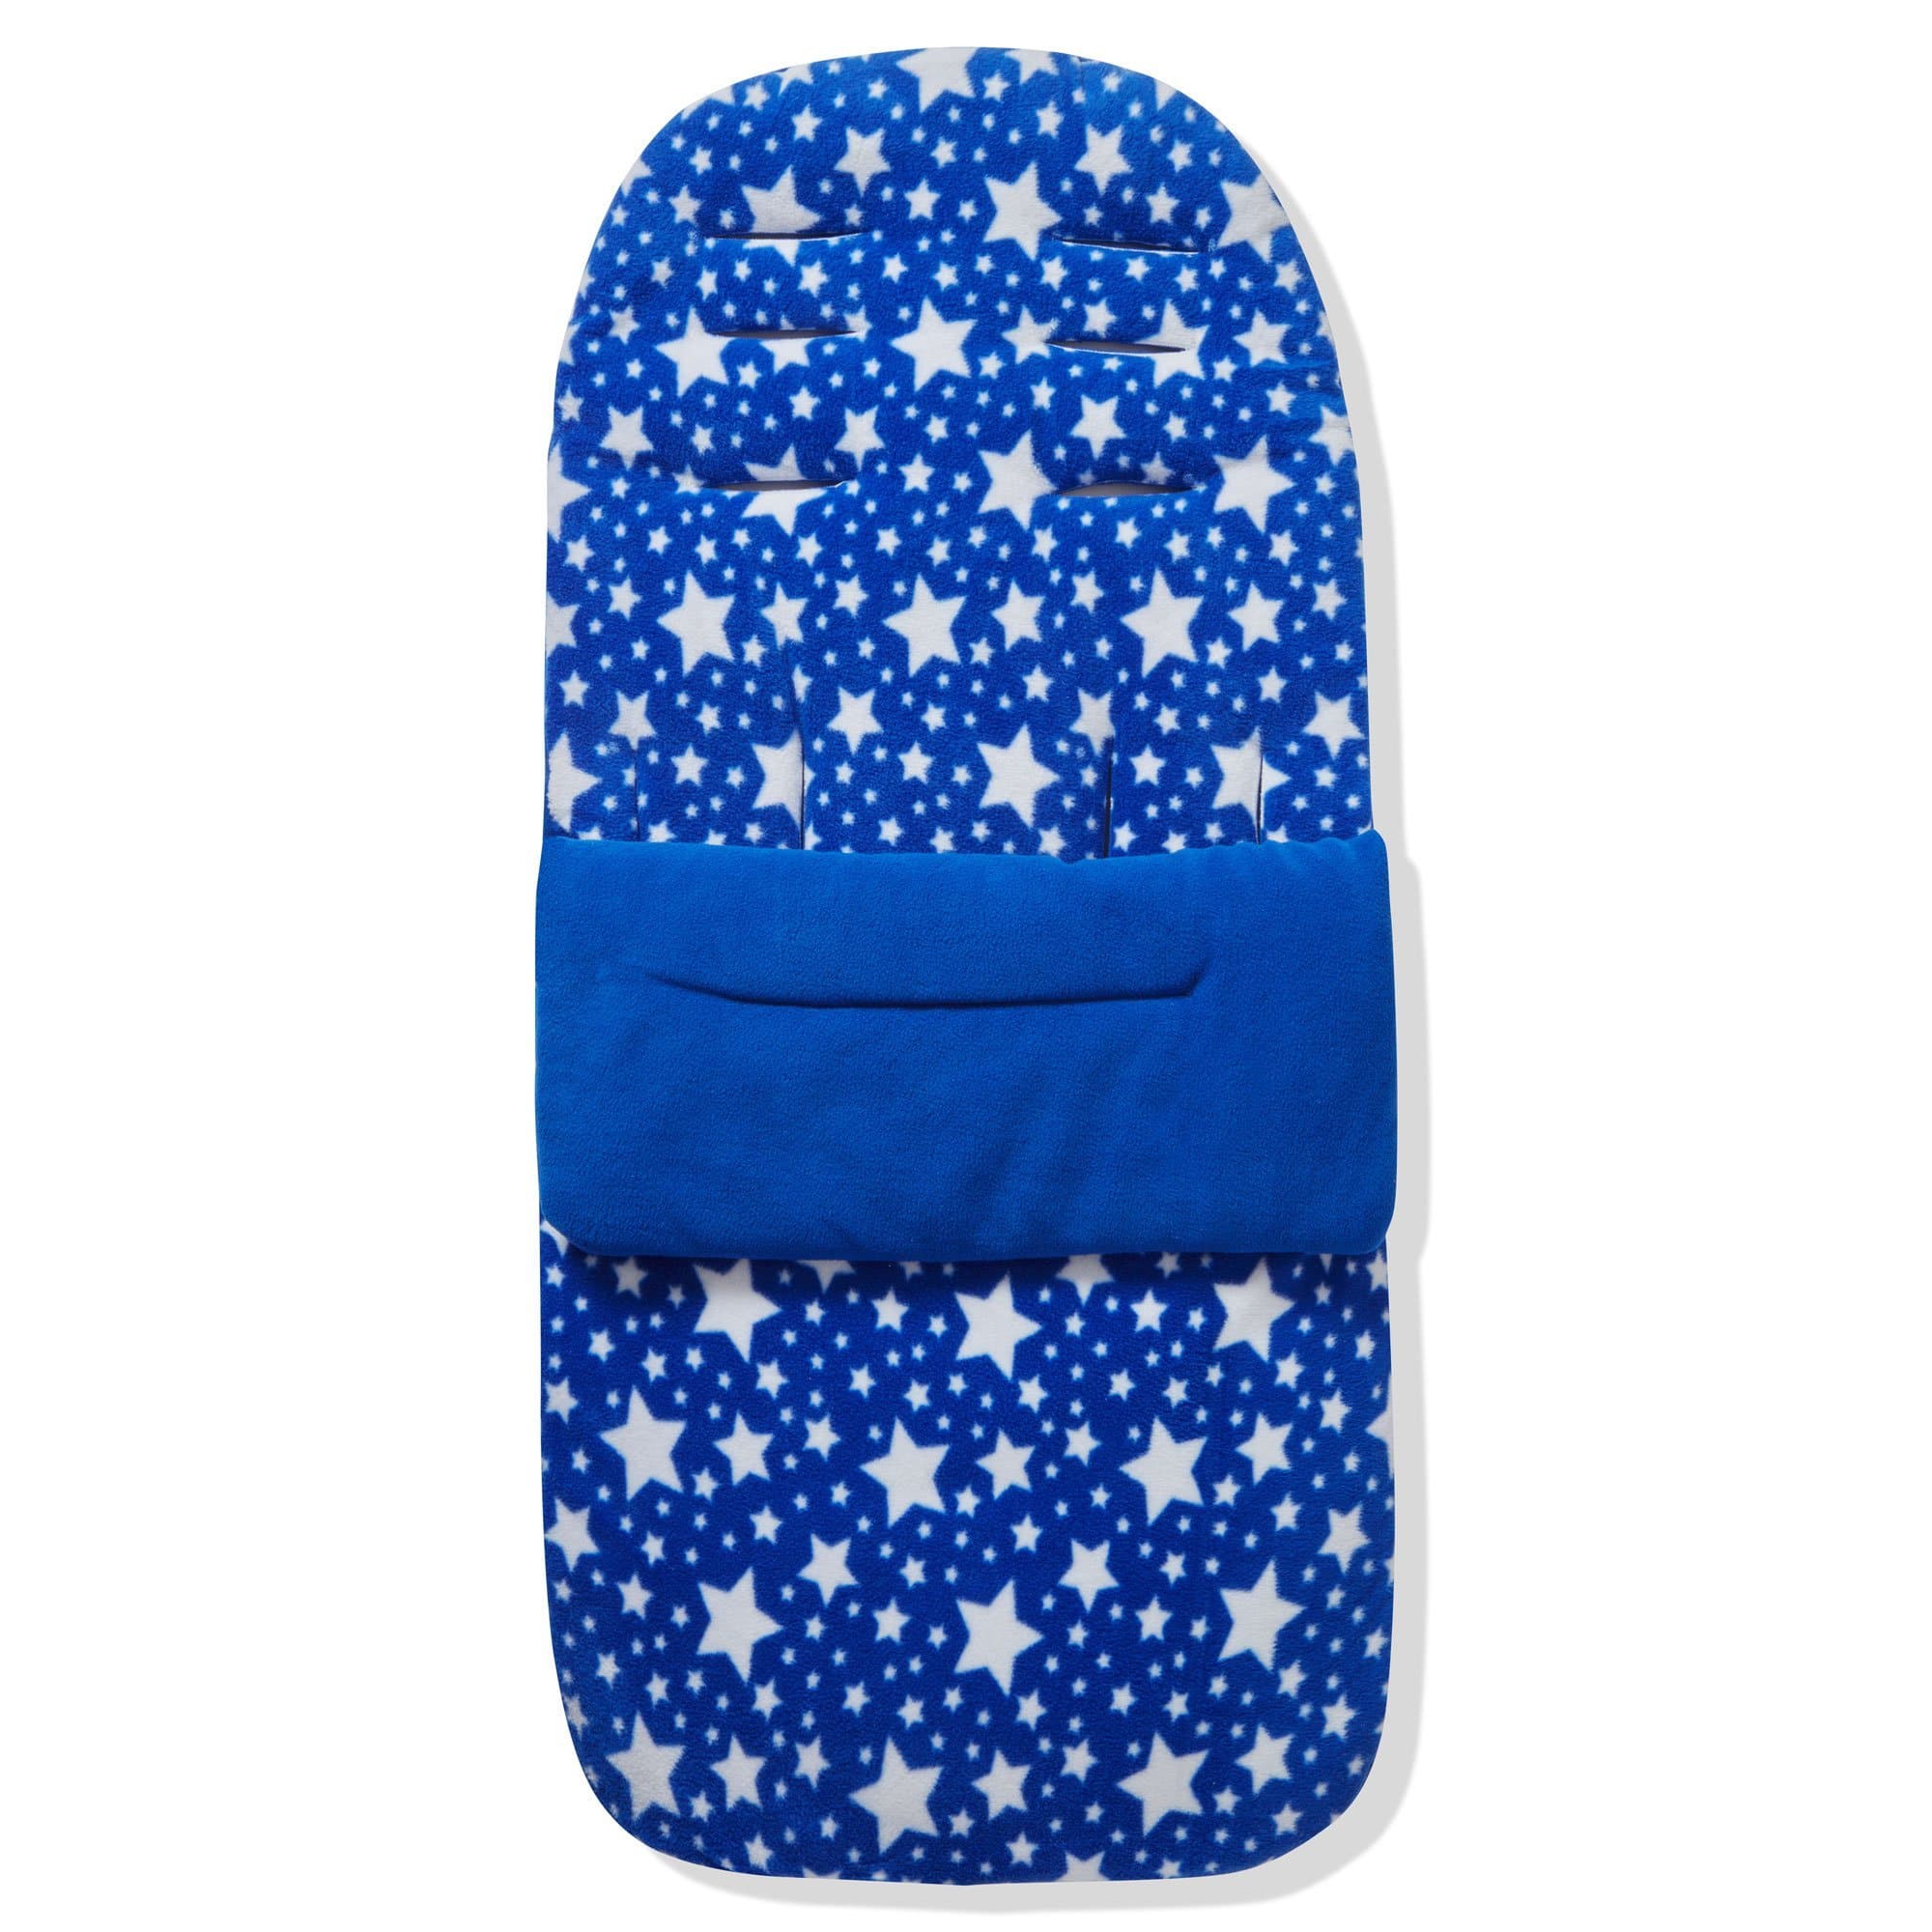 Fleece Footmuff / Cosy Toes Compatible with BabySun - Blue Star / Fits All Models | For Your Little One